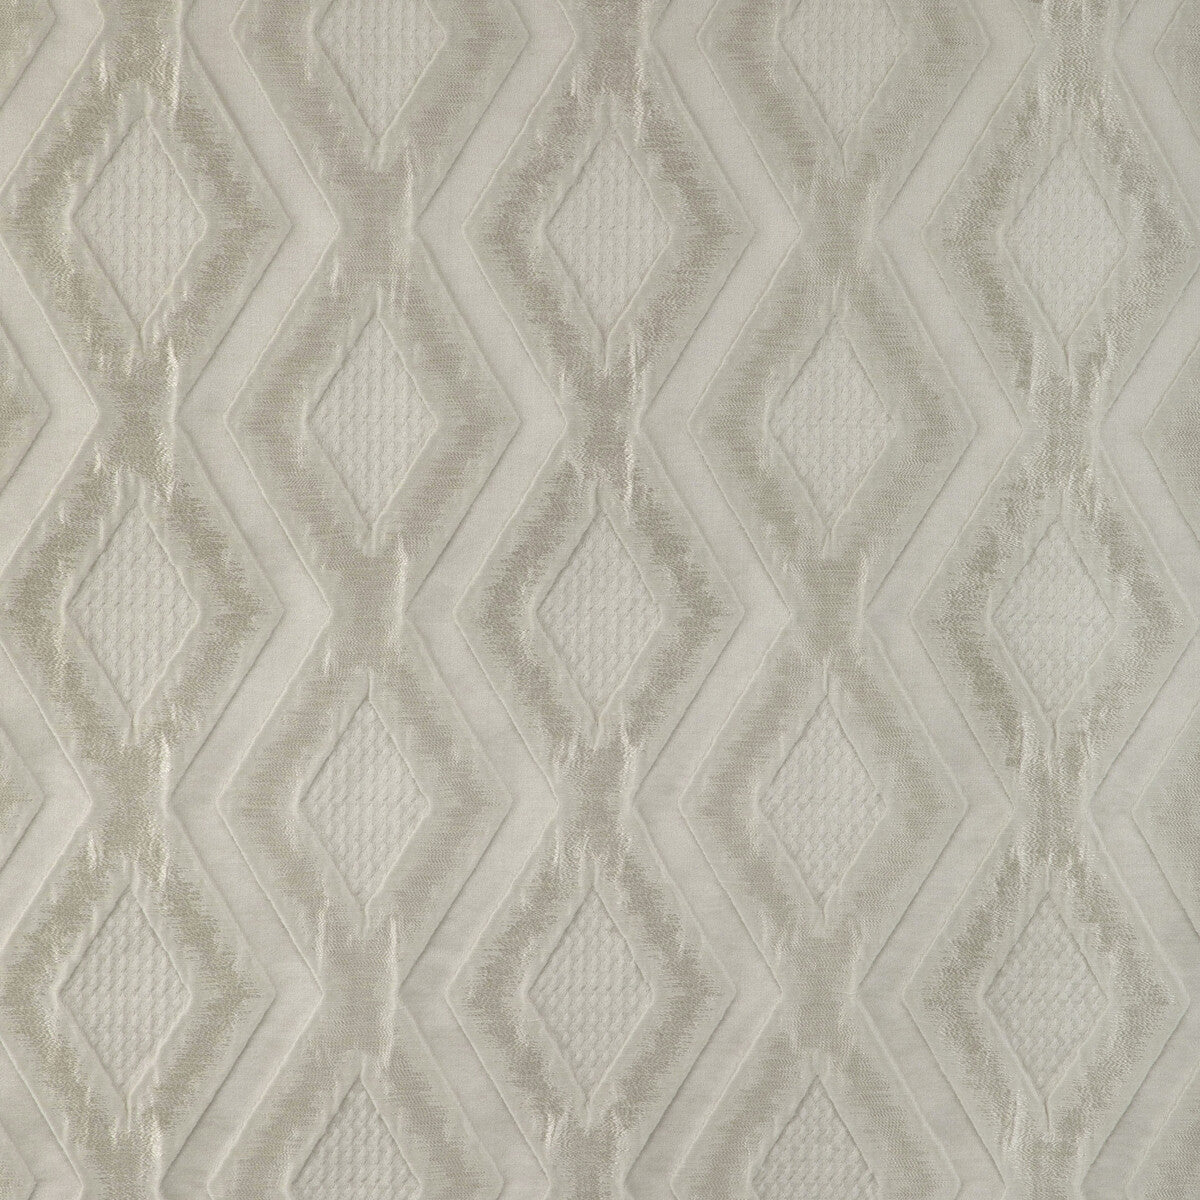 Flawless fabric in blush color - pattern 36839.1.0 - by Kravet Design in the Candice Olson collection